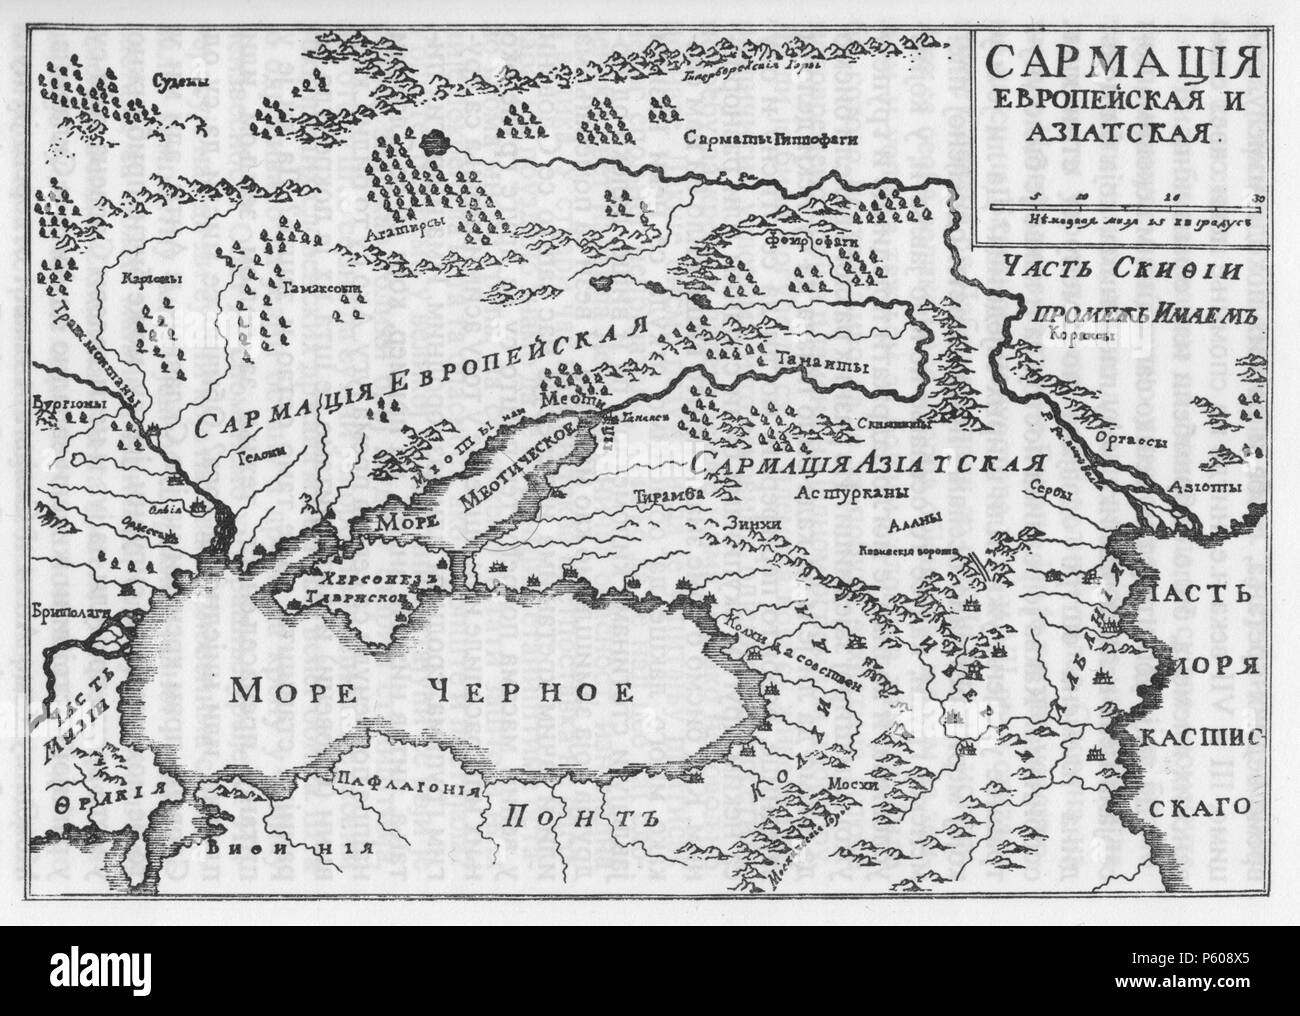 N/A. English: Map of European and Asiatic Sarmatia - made by Jovan Raji in 1794. Language of this map is archaic version of literary Serbian from the 18th century. 1794. Jovan Raji 536 European and Asiatic Sarmatia 1794 Stock Photo